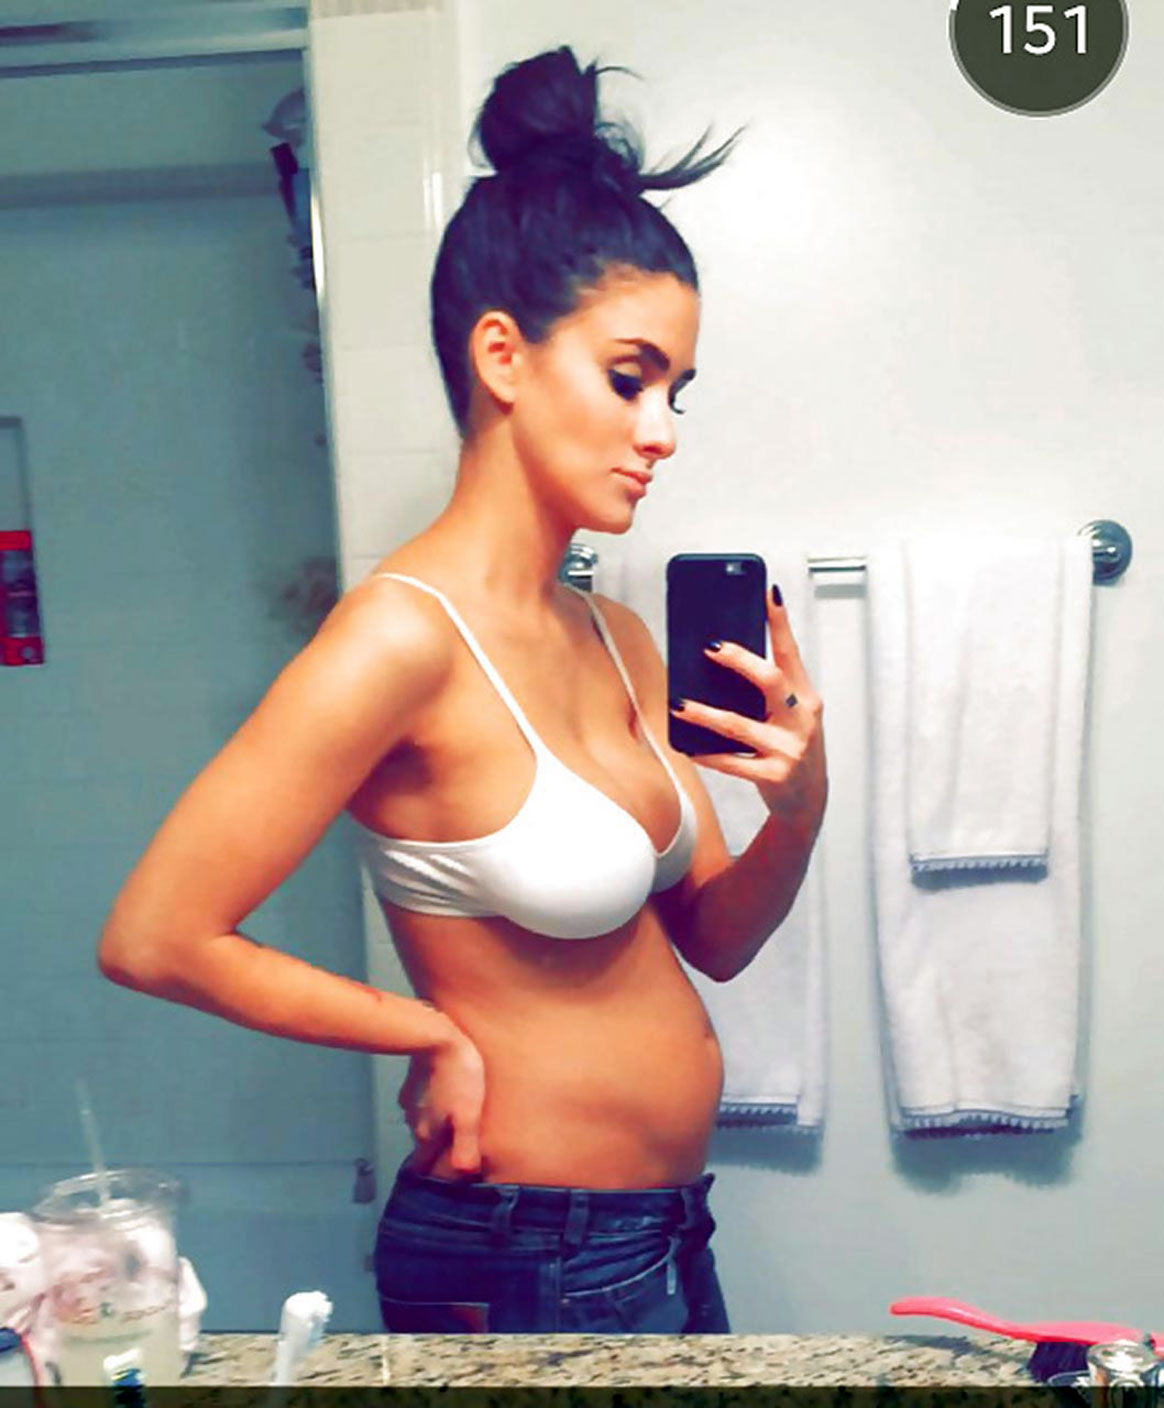 Furlan nudes brittany leaked Brittany Furlan